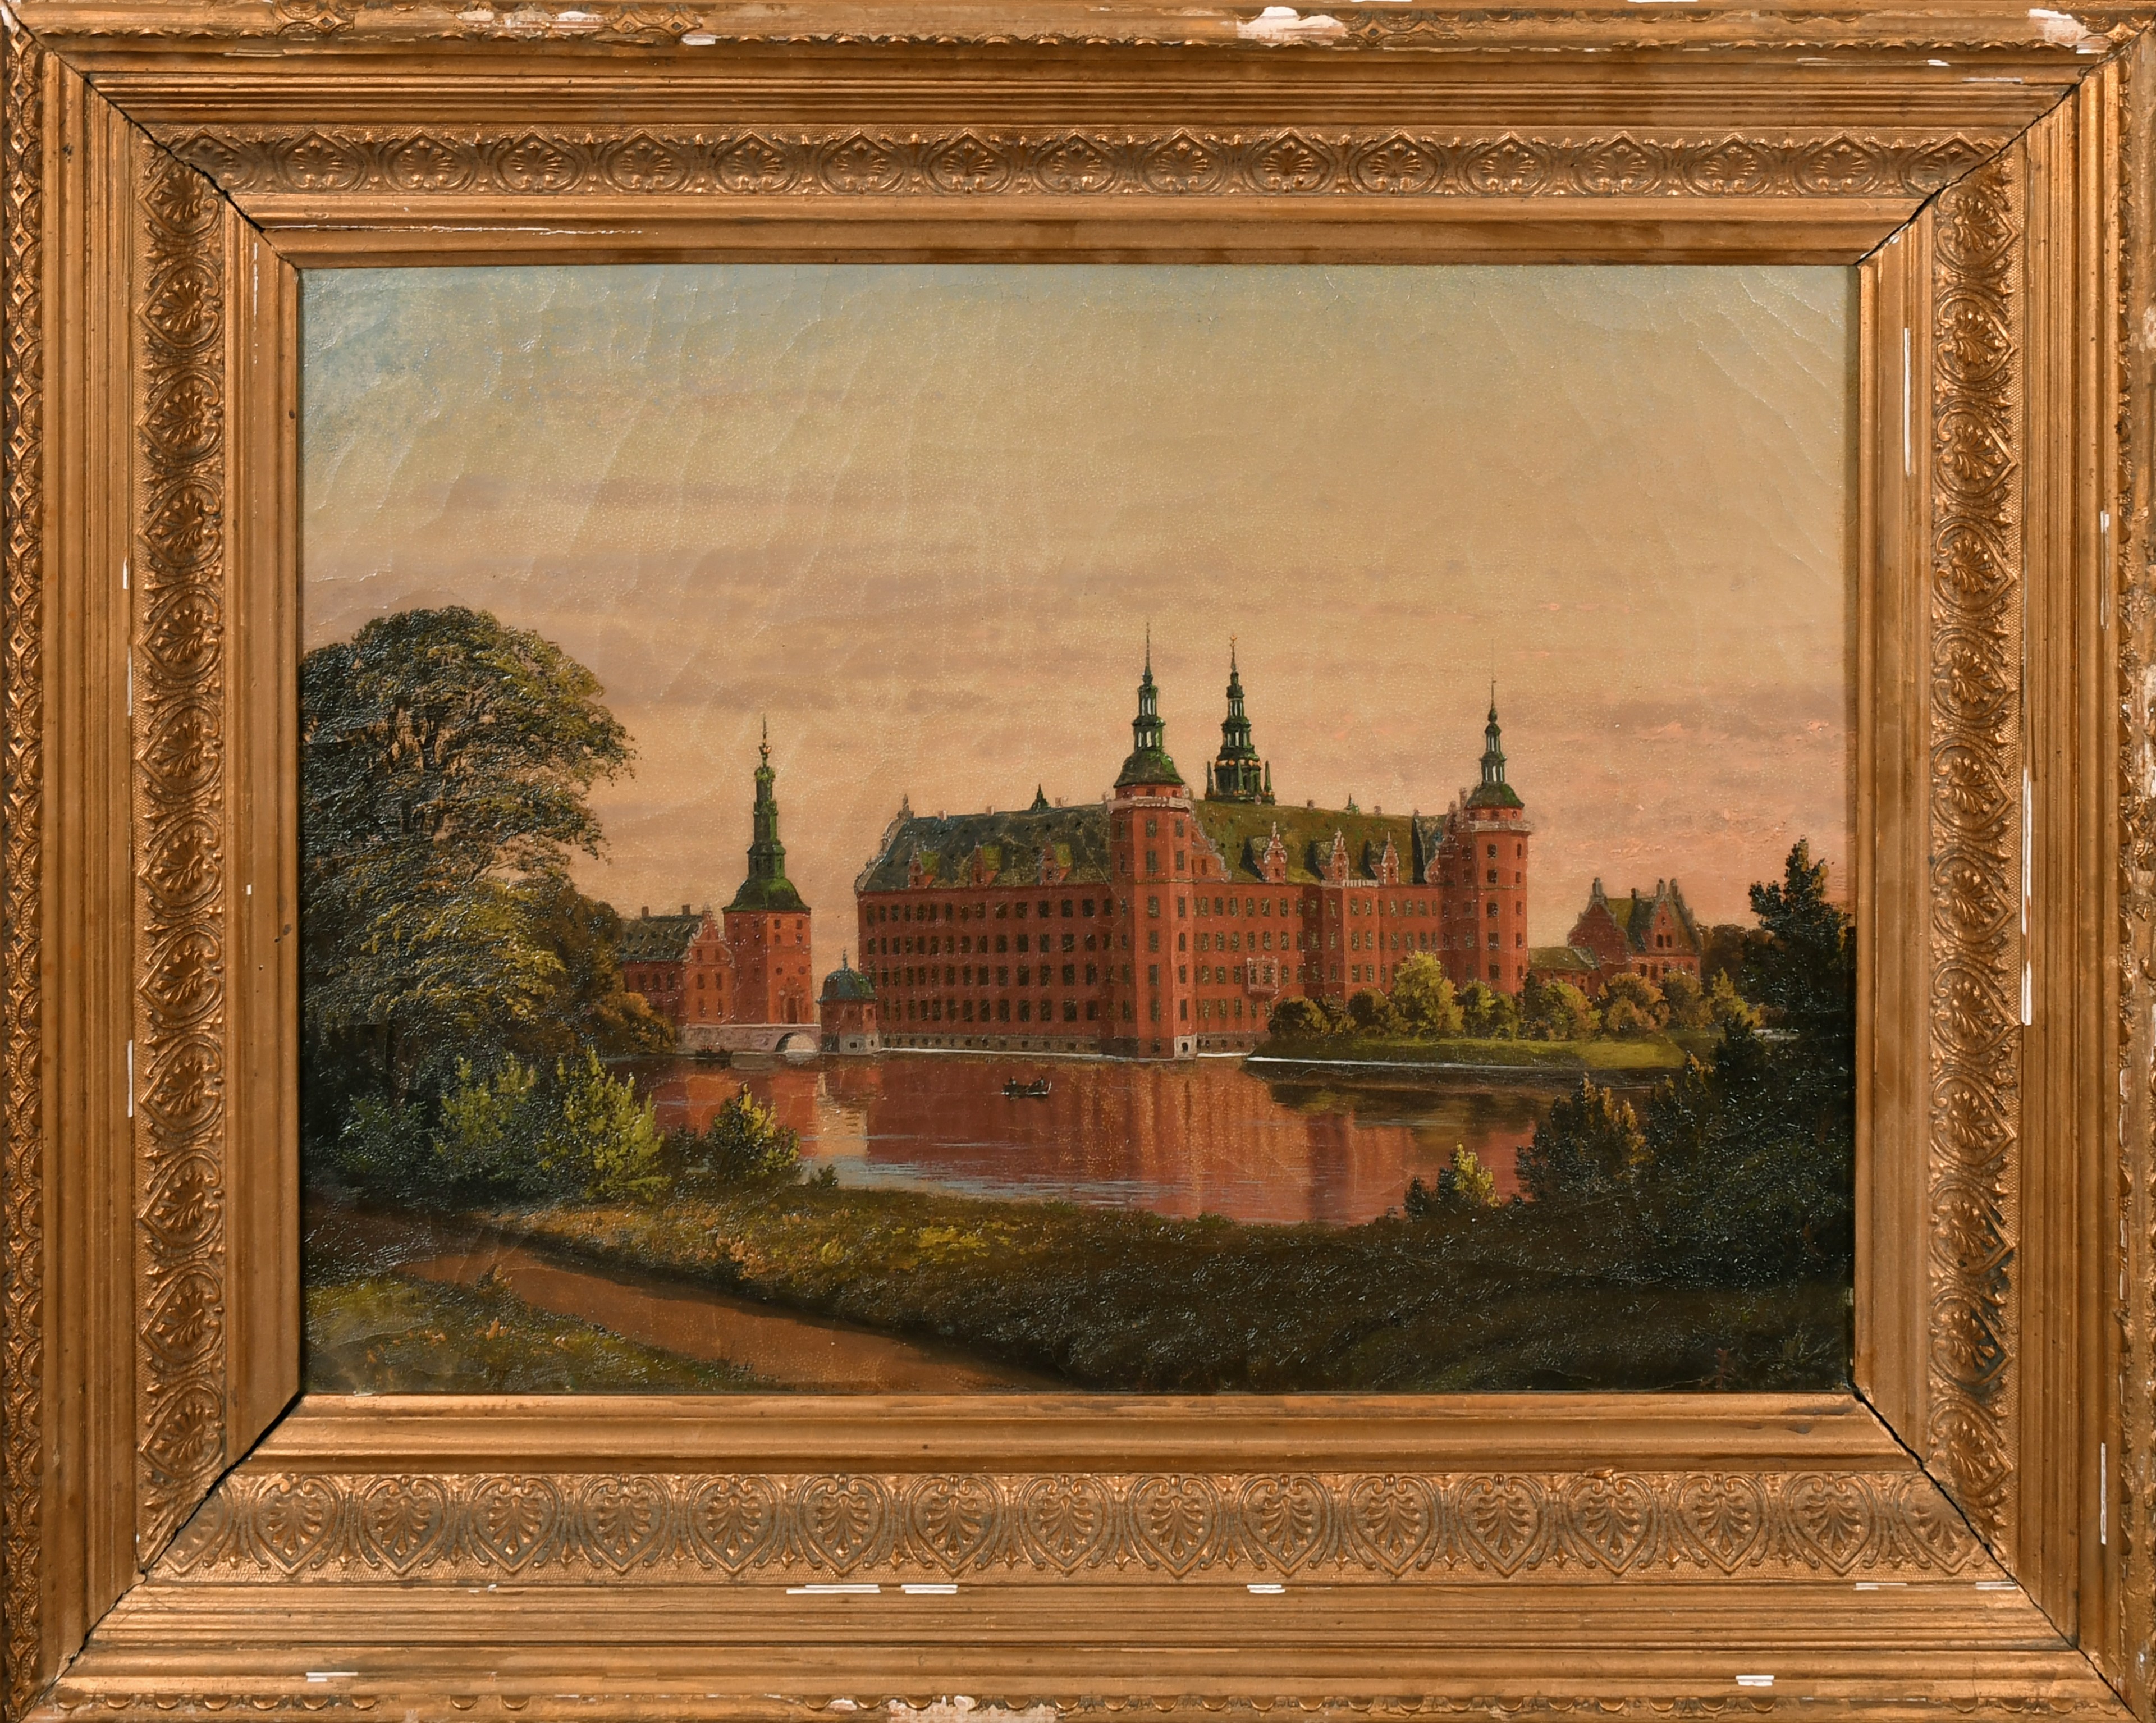 19th Century Danish School. Study of a Castle by a Lake, Oil on canvas, Indistinctly signed, 13.5" x - Image 2 of 3